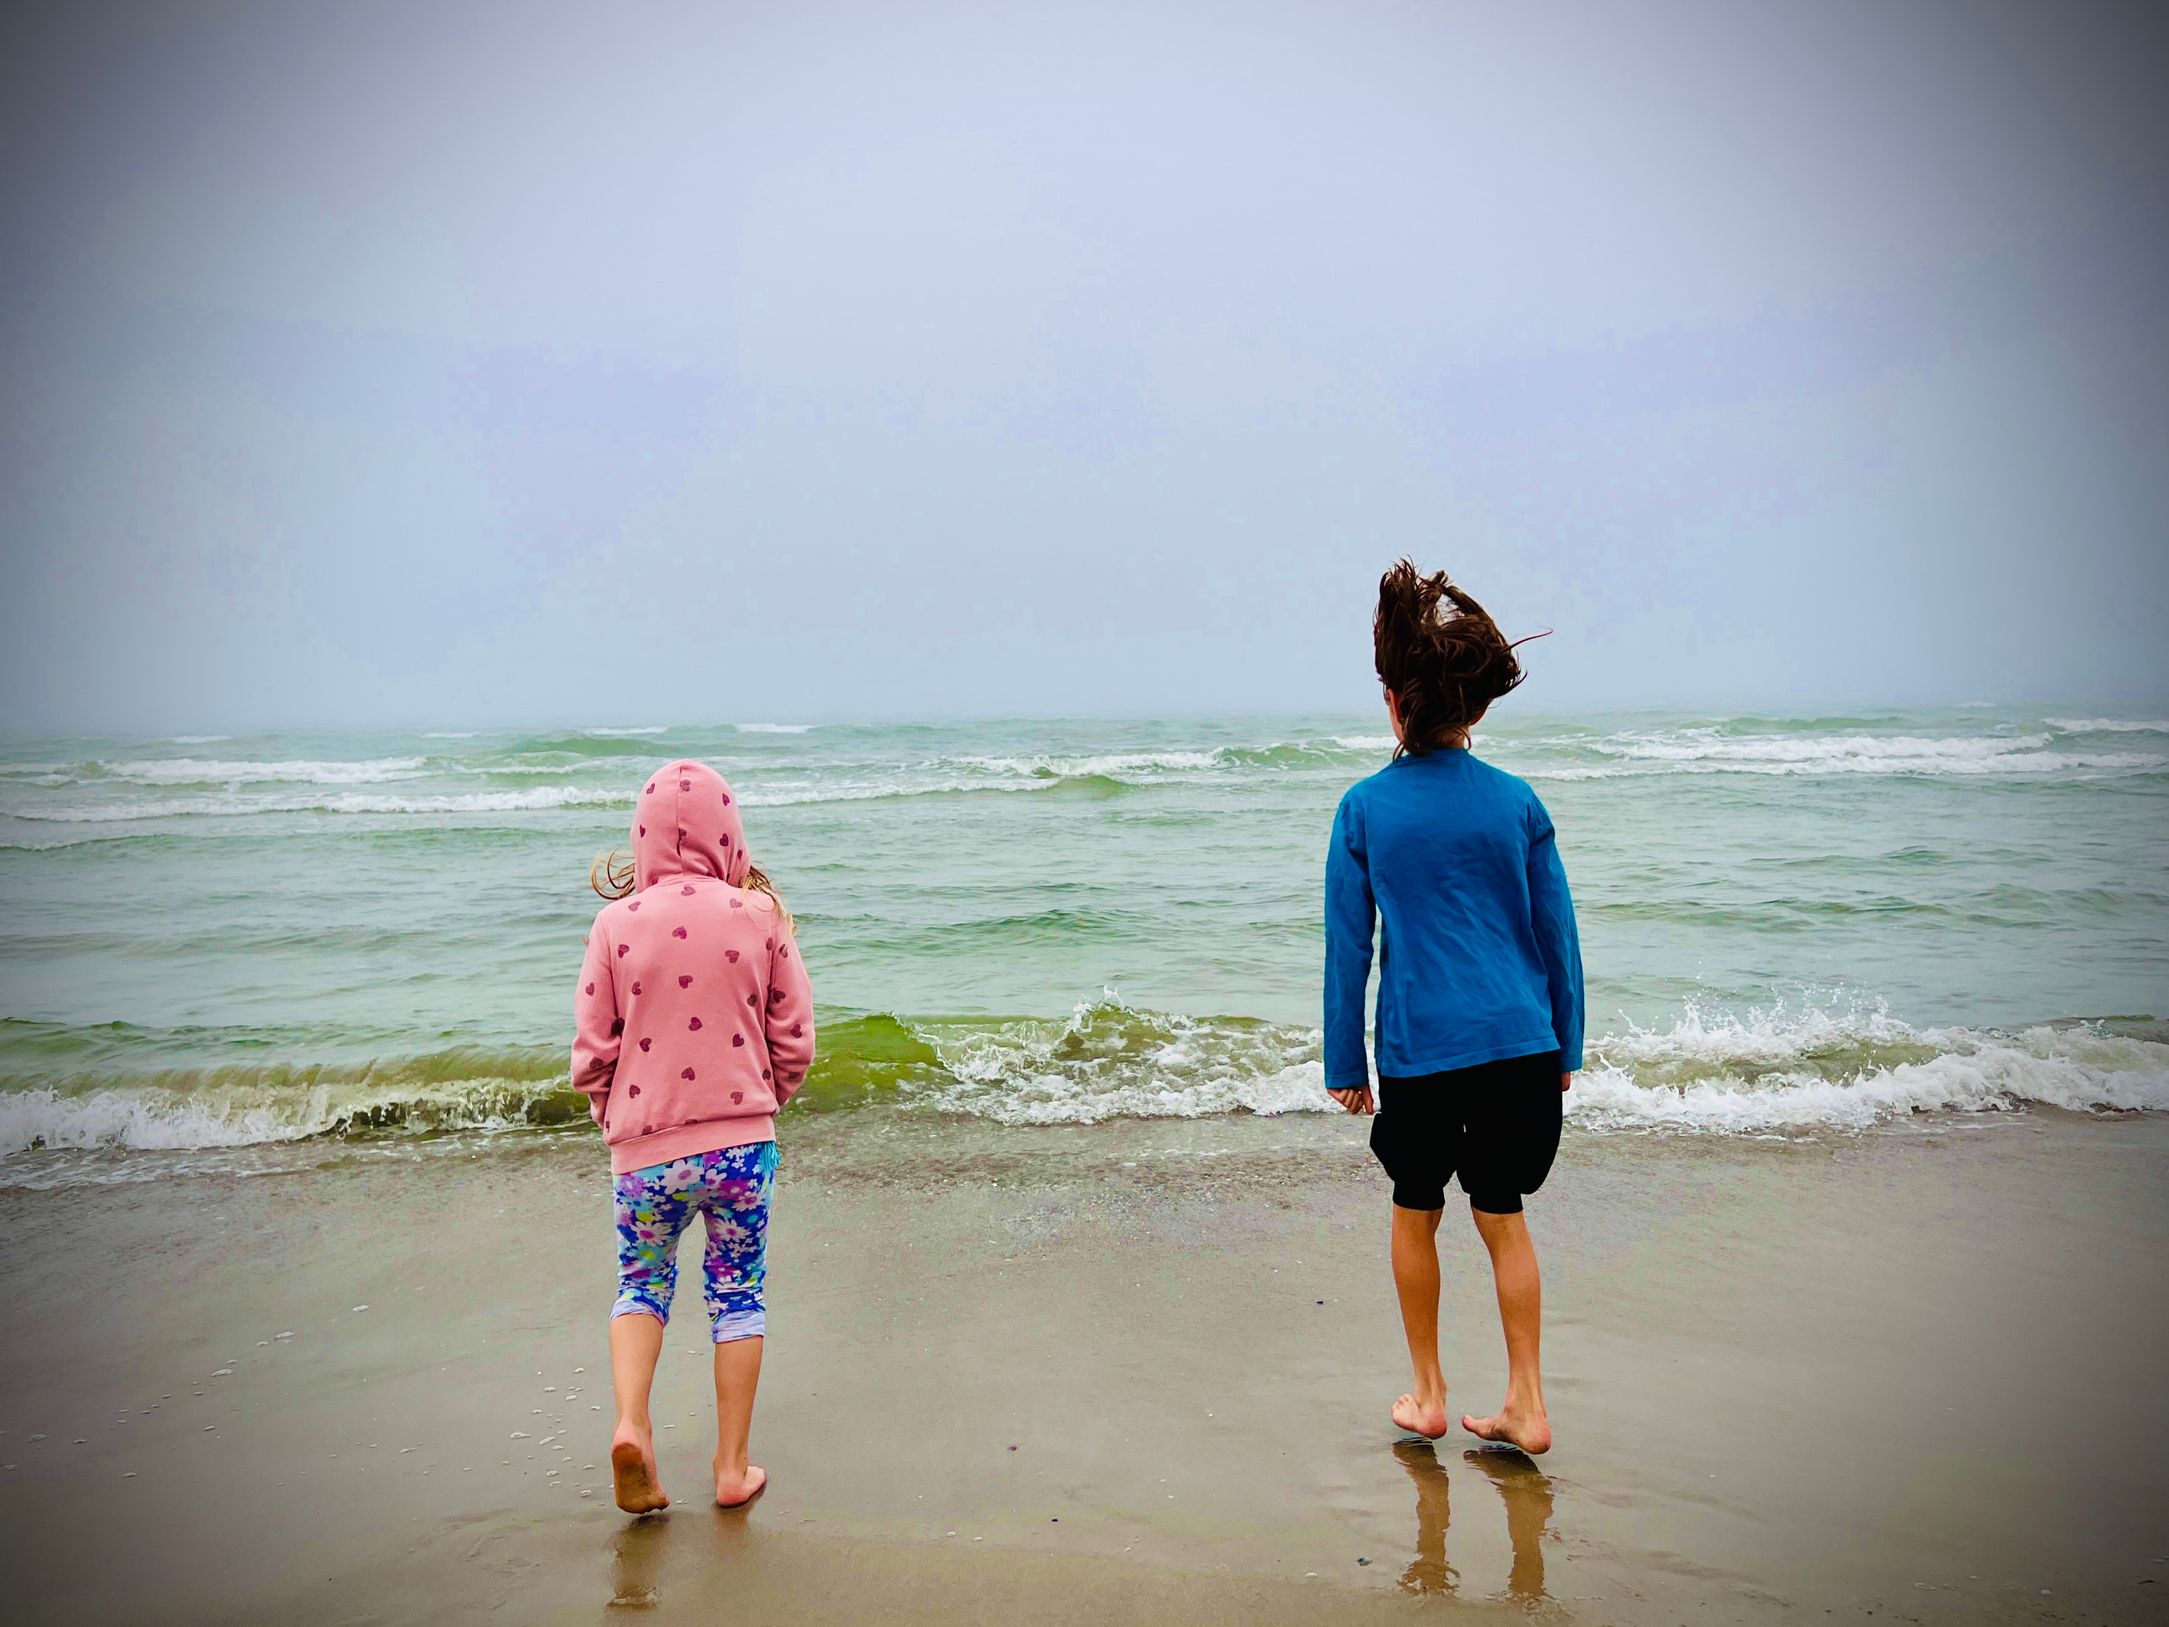 Two kids on the beach. Stormy weather.